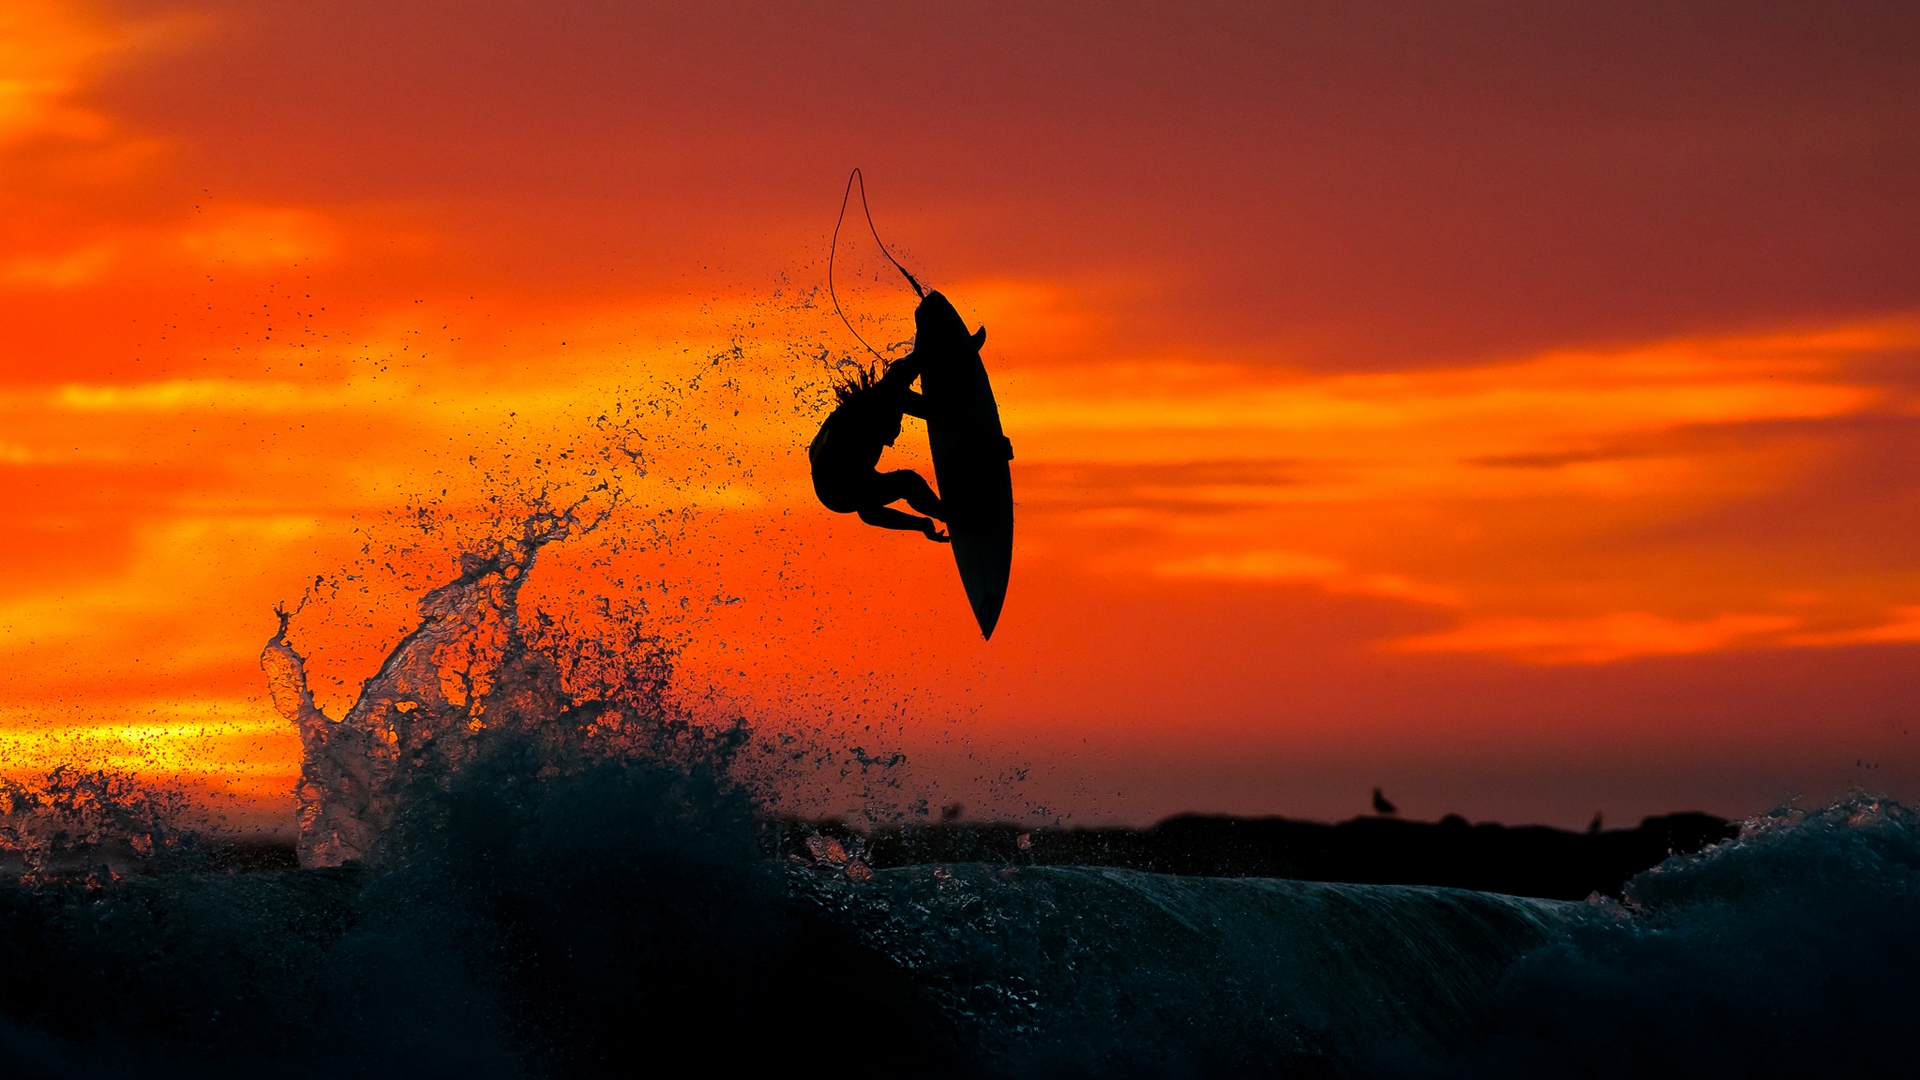 Sports Surfing HD Wallpaper | Background Image